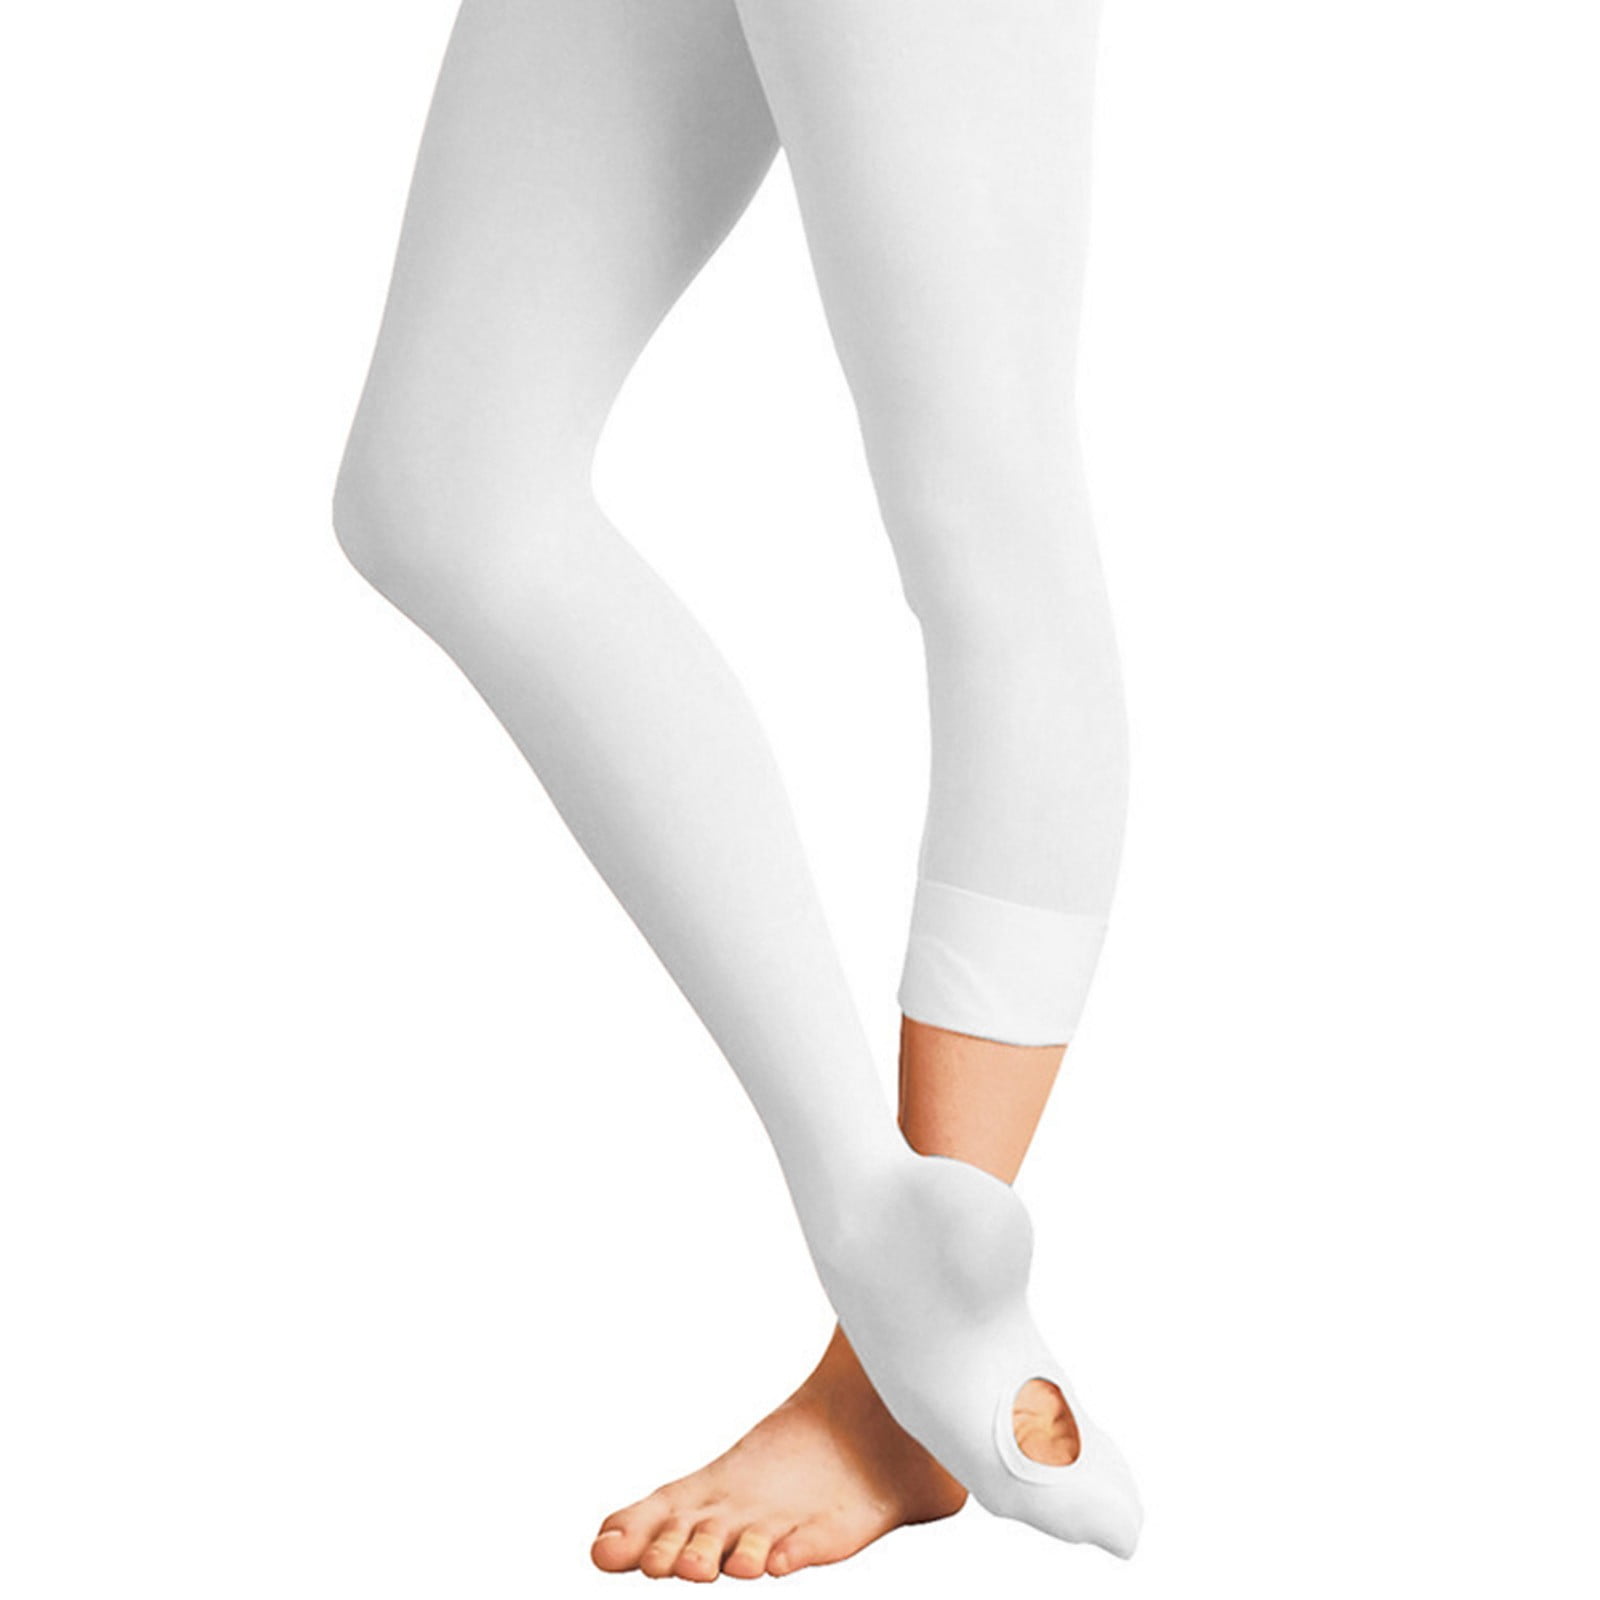  iMucci Ballet Dance Tights Girls - Velet Convertible Ballerina  Dancing Leggings for Kids Adults Super Elasticity Performance Stockings  White S : Sports & Outdoors